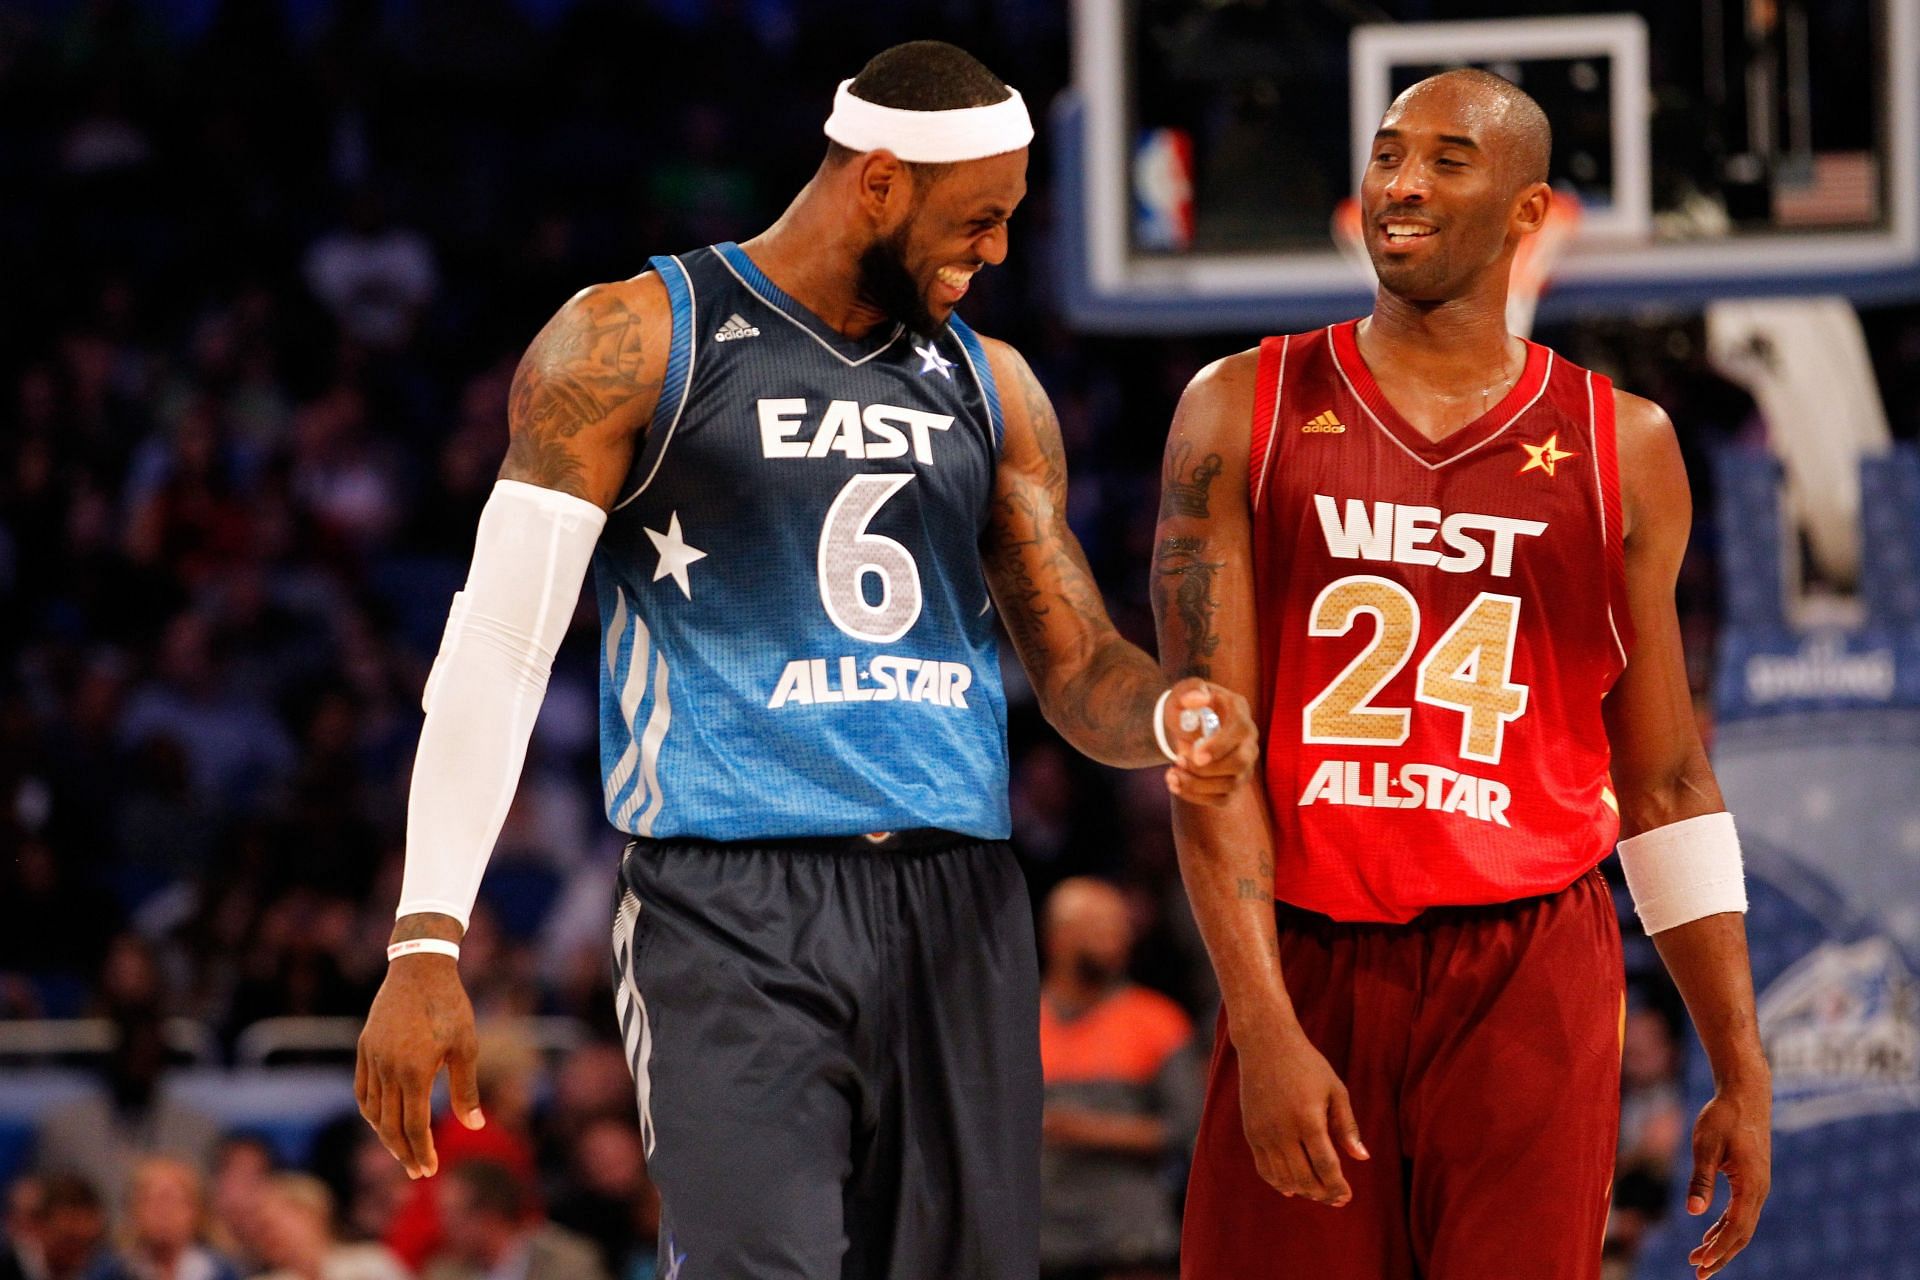 Miami Heat&#039;s LeBron James of the Eastern Conference talks with LA Lakers&#039; Kobe Bryant of the Western Conference during the 2012 NBA All-Star Game